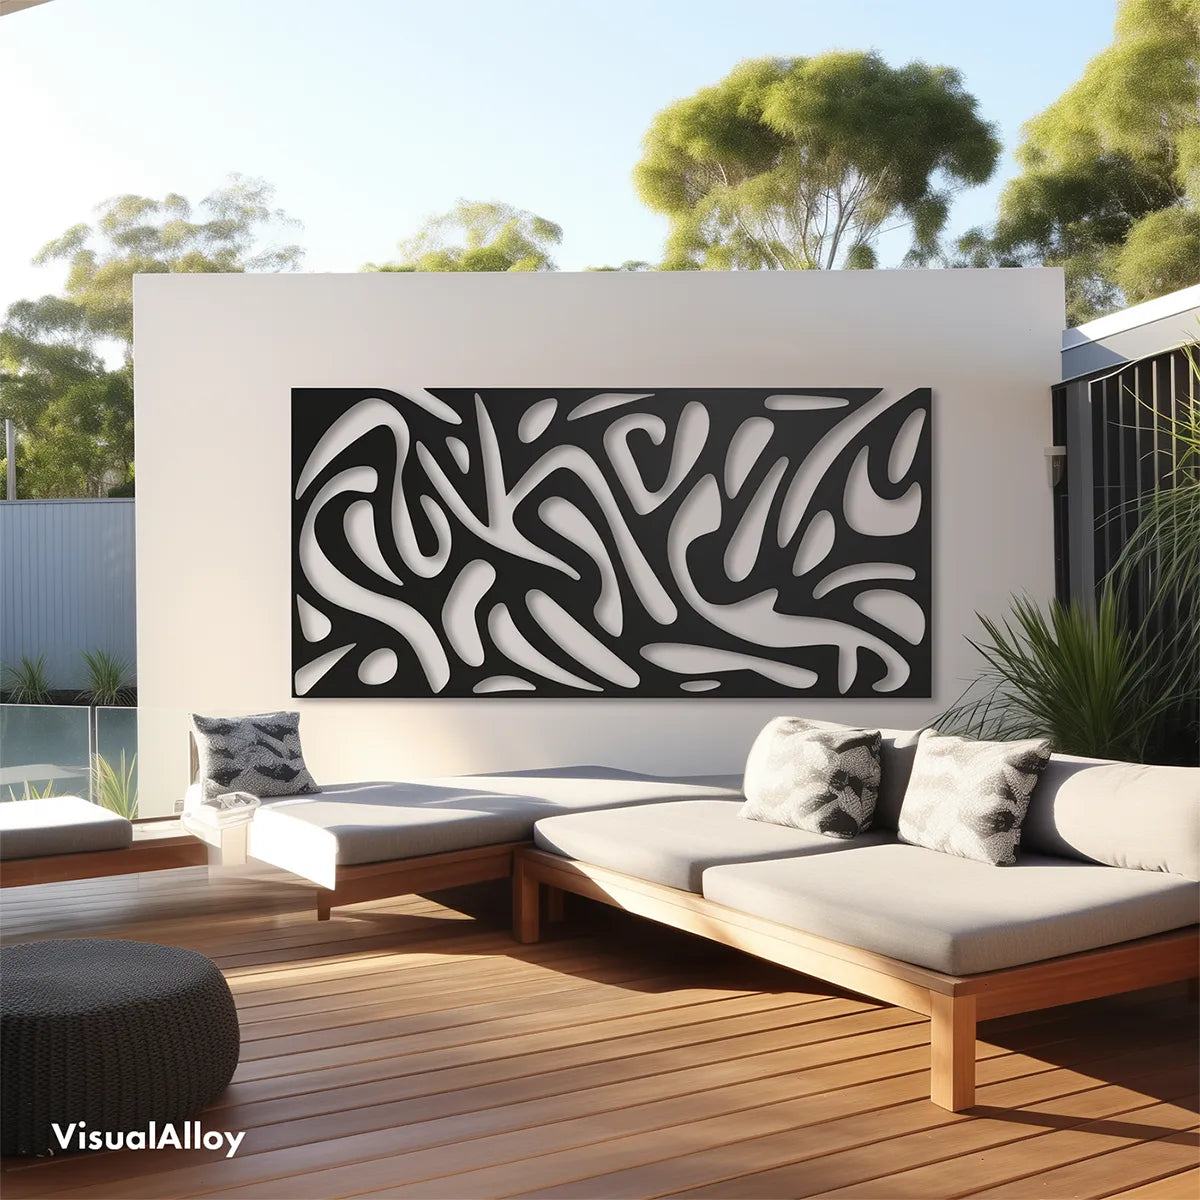 Black metal wall art for outdoor space